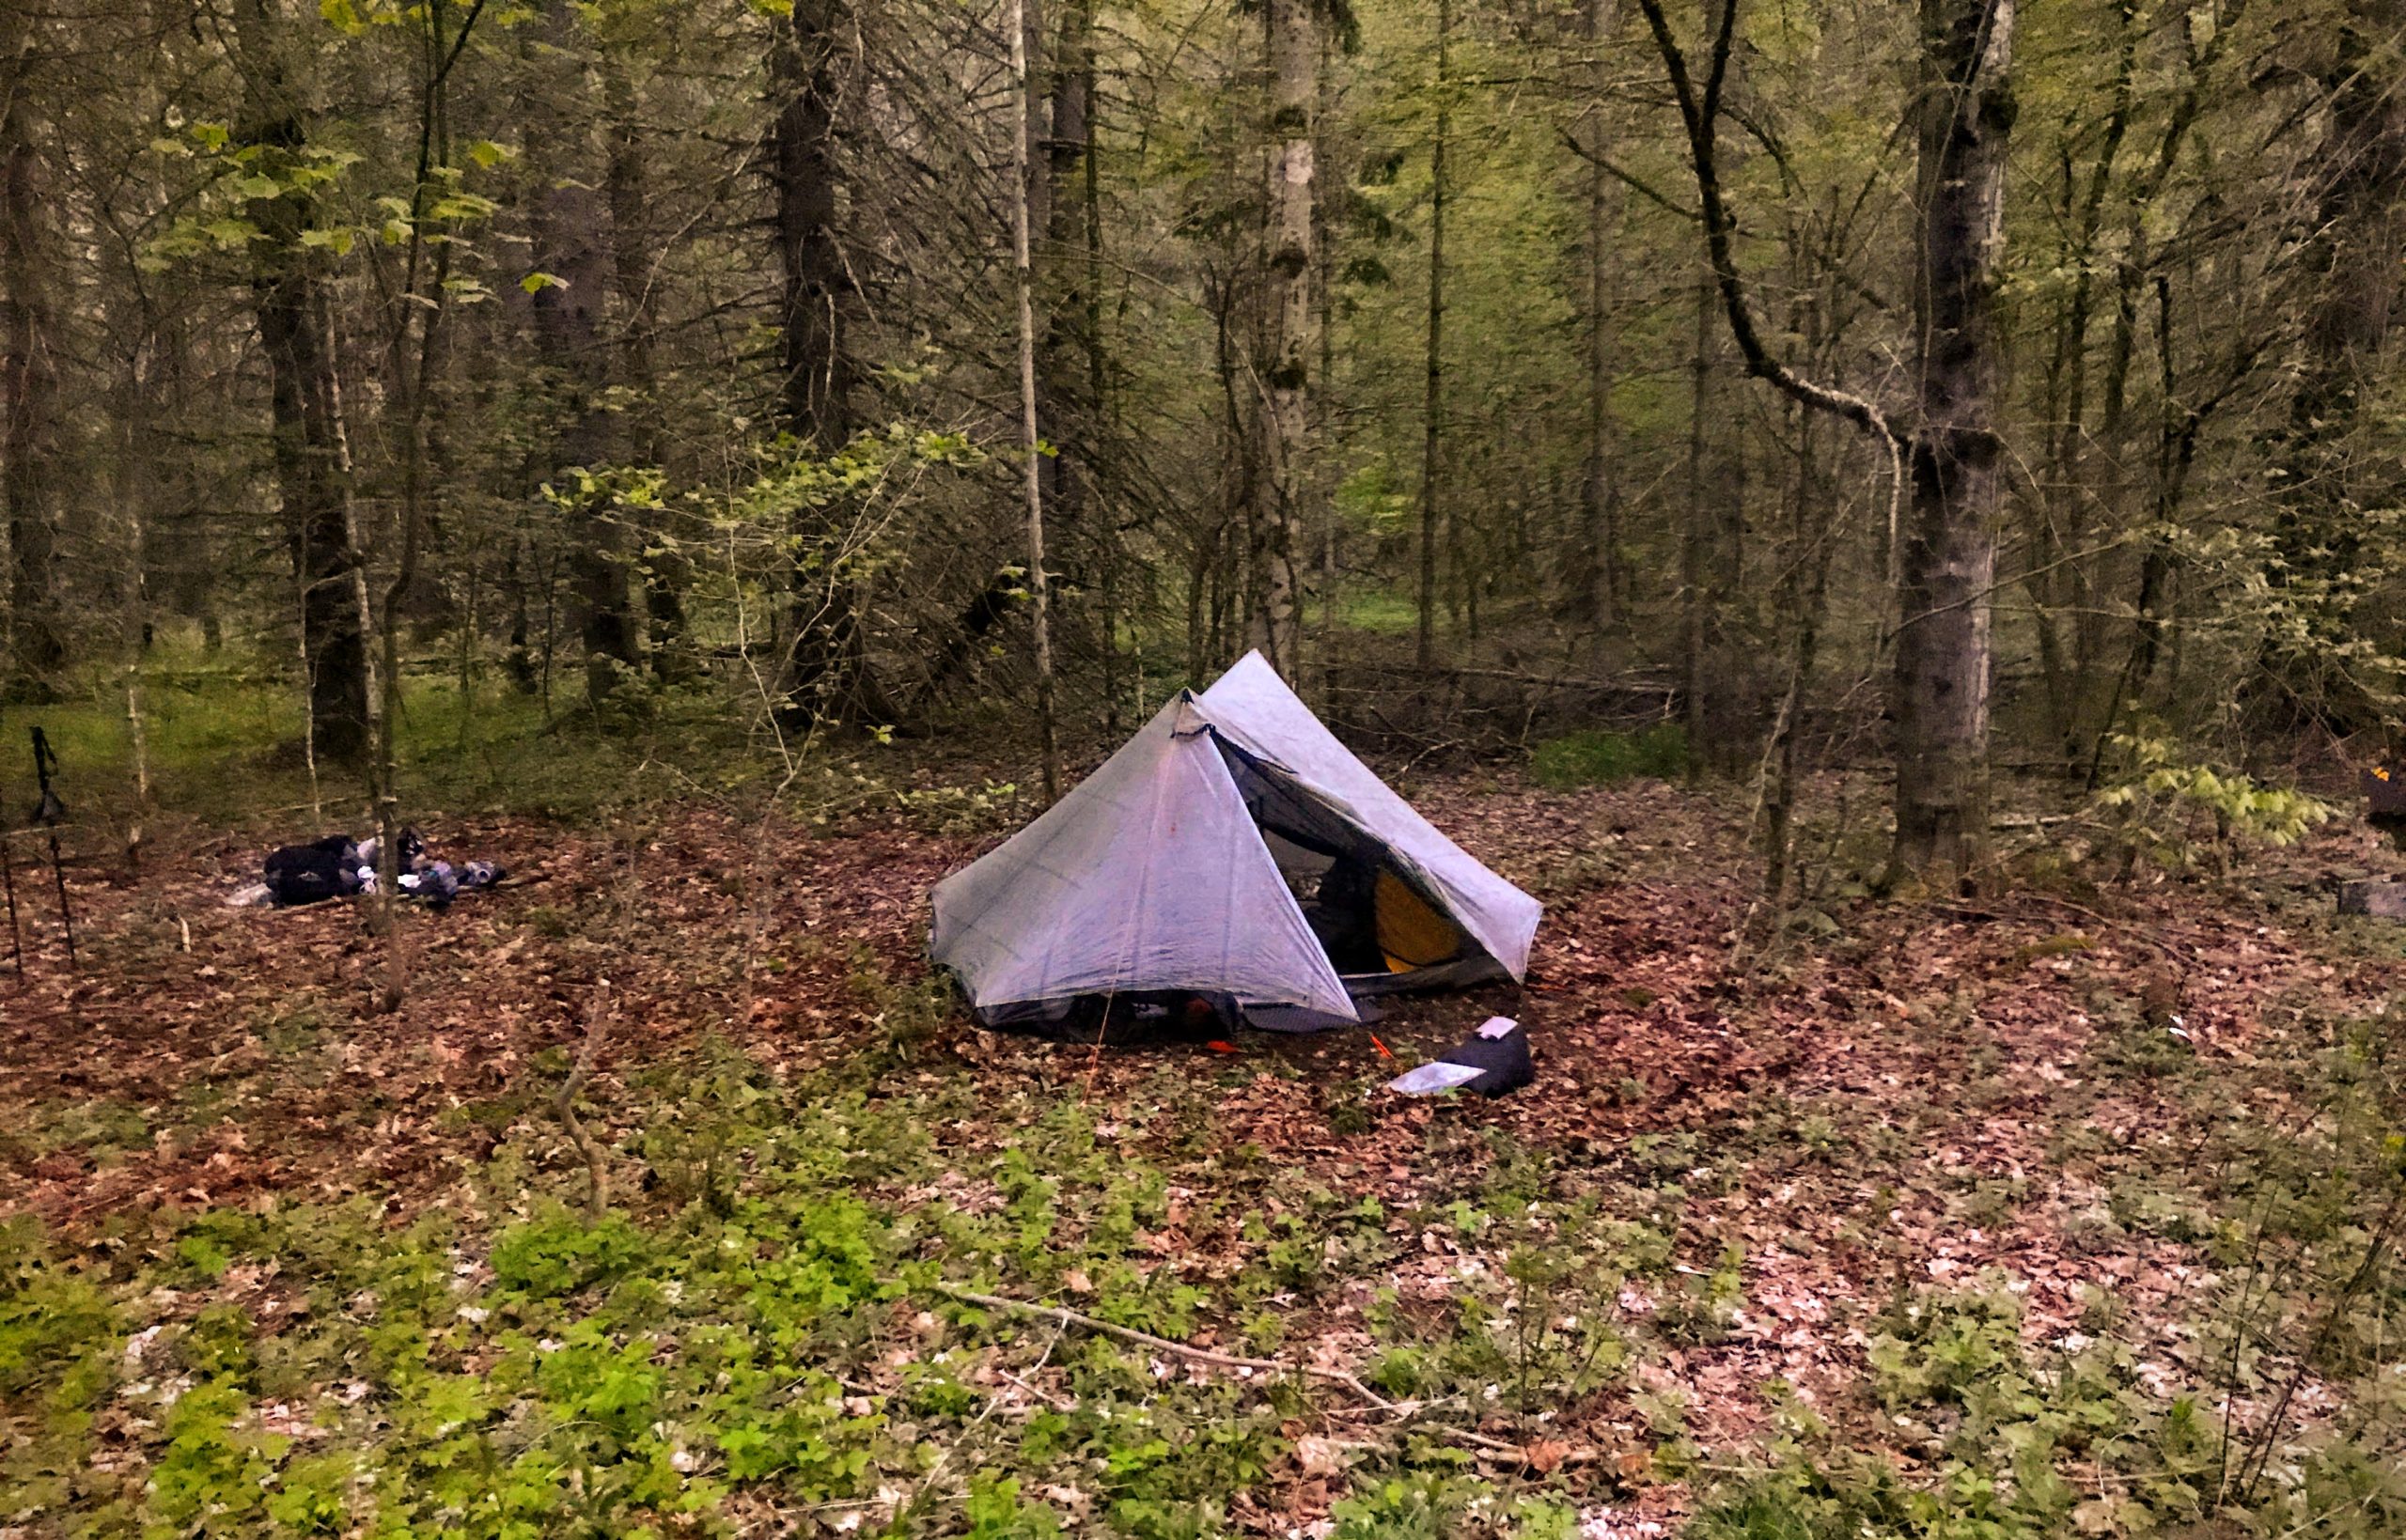 Where (and How) to Find Primitive Catskills Camping